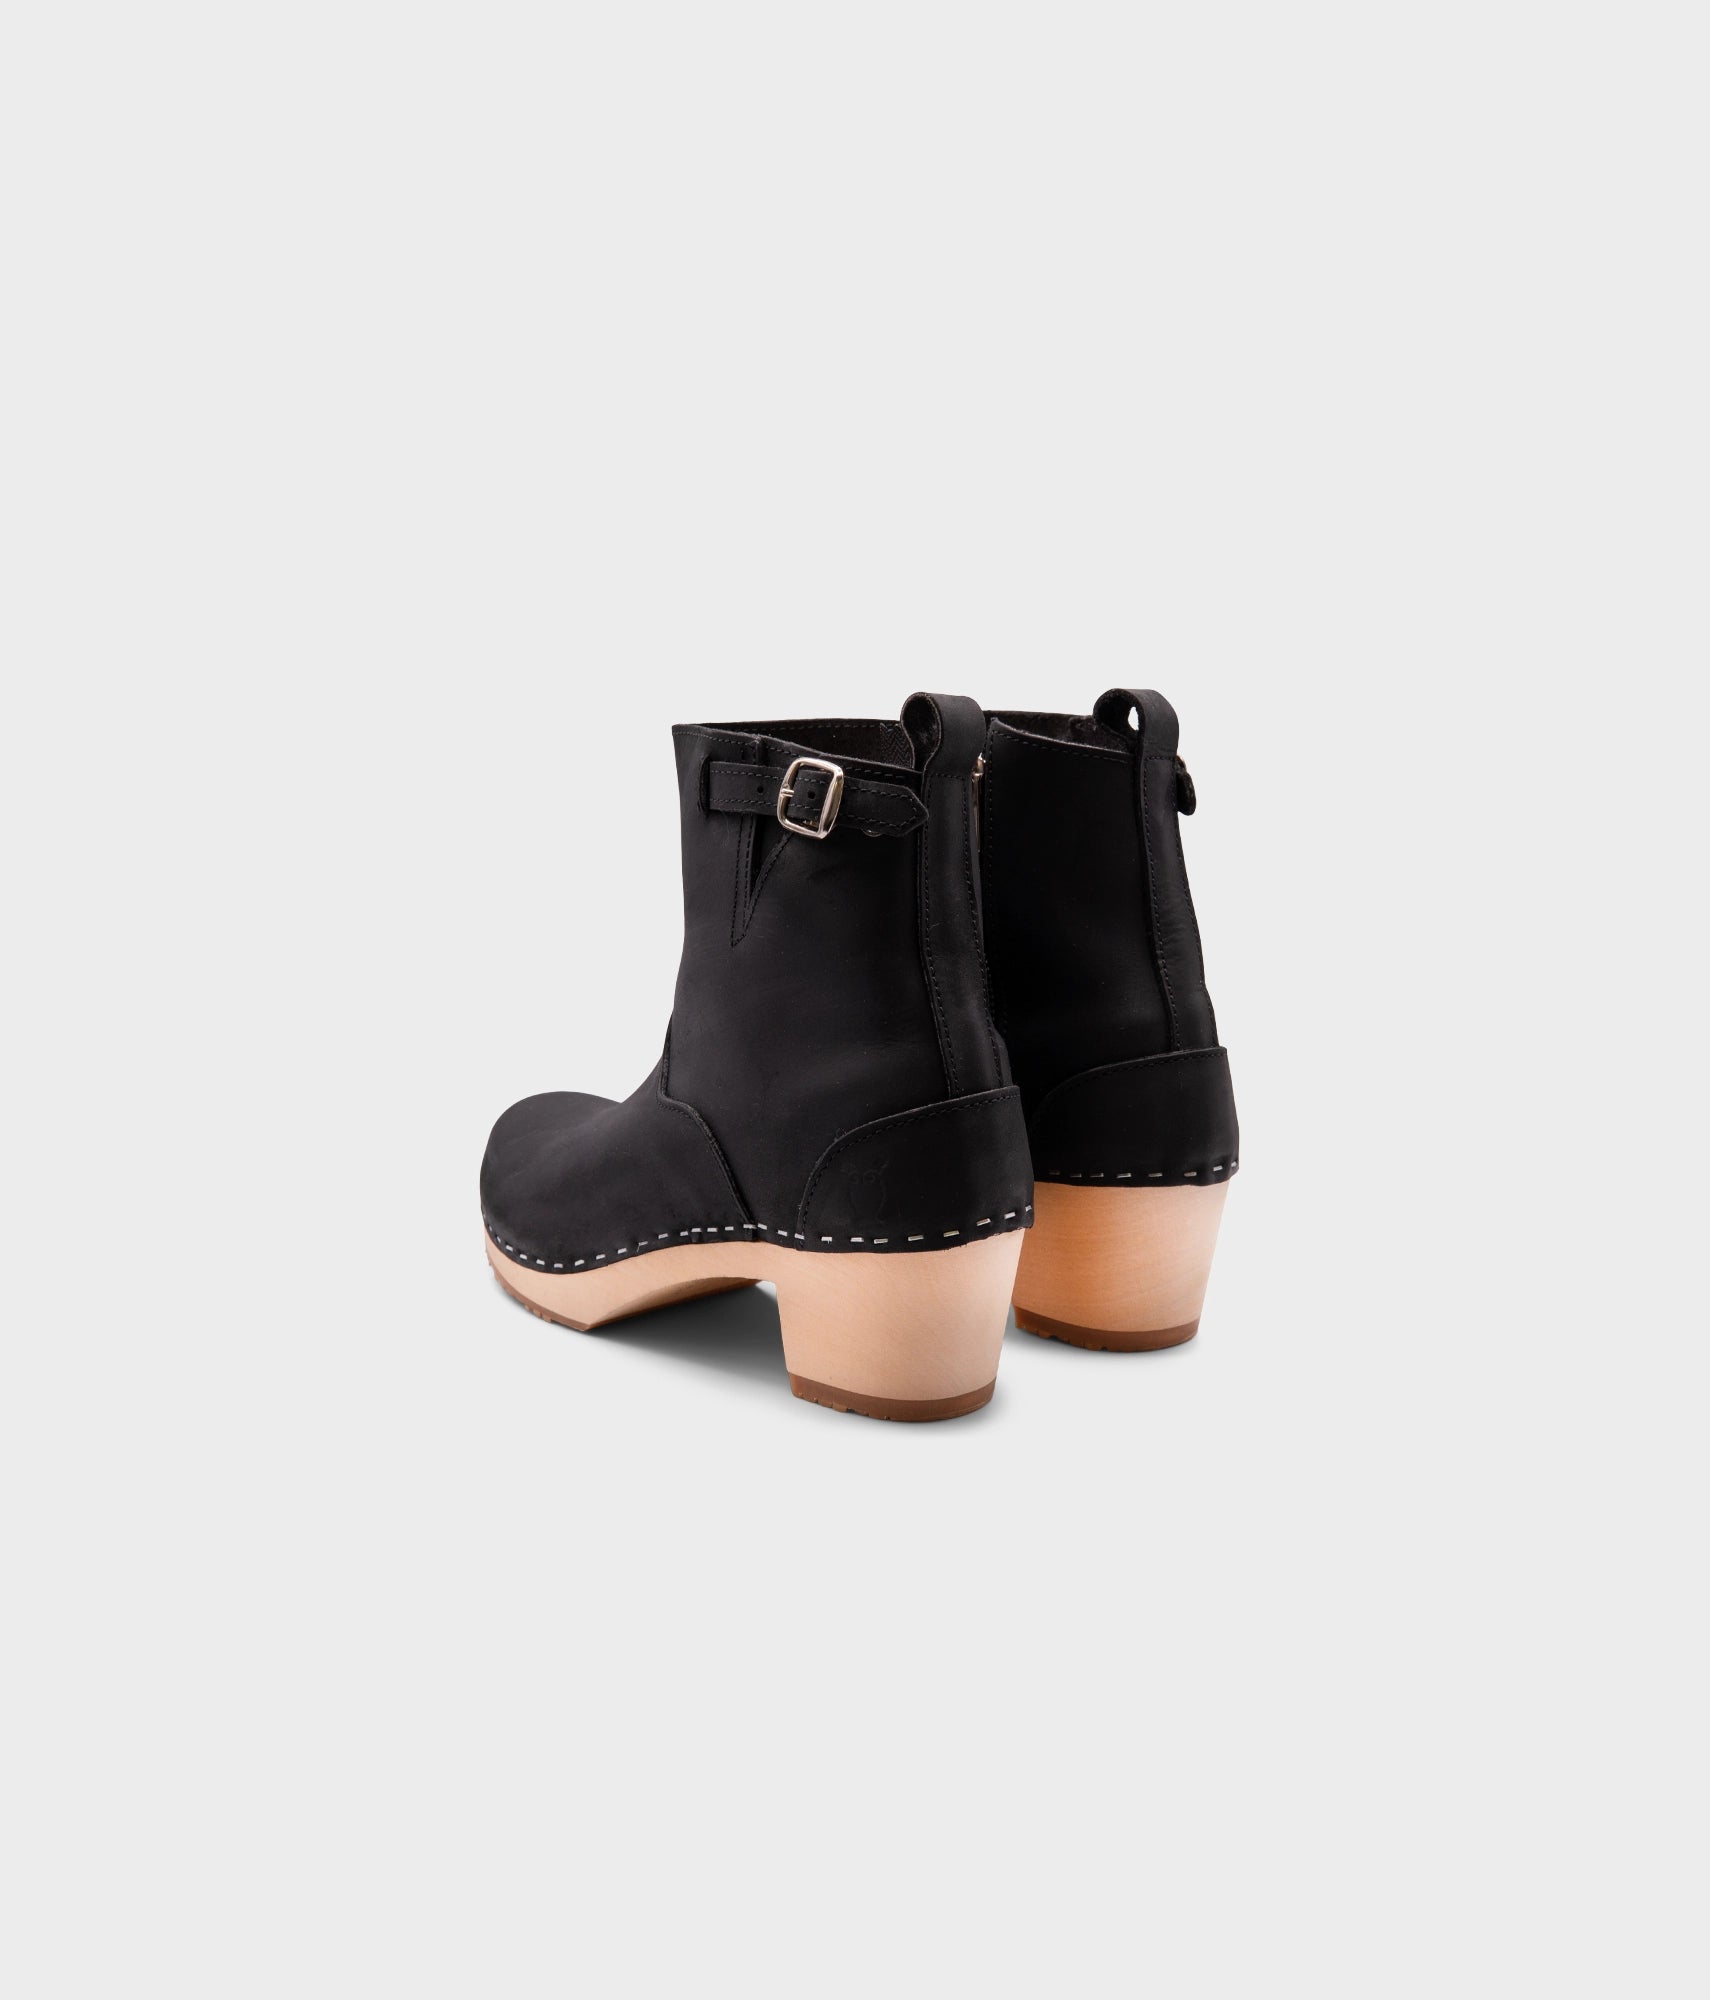 high-heeled clog boots in black nubuck leather stapled on a light wooden base with a silver buckle